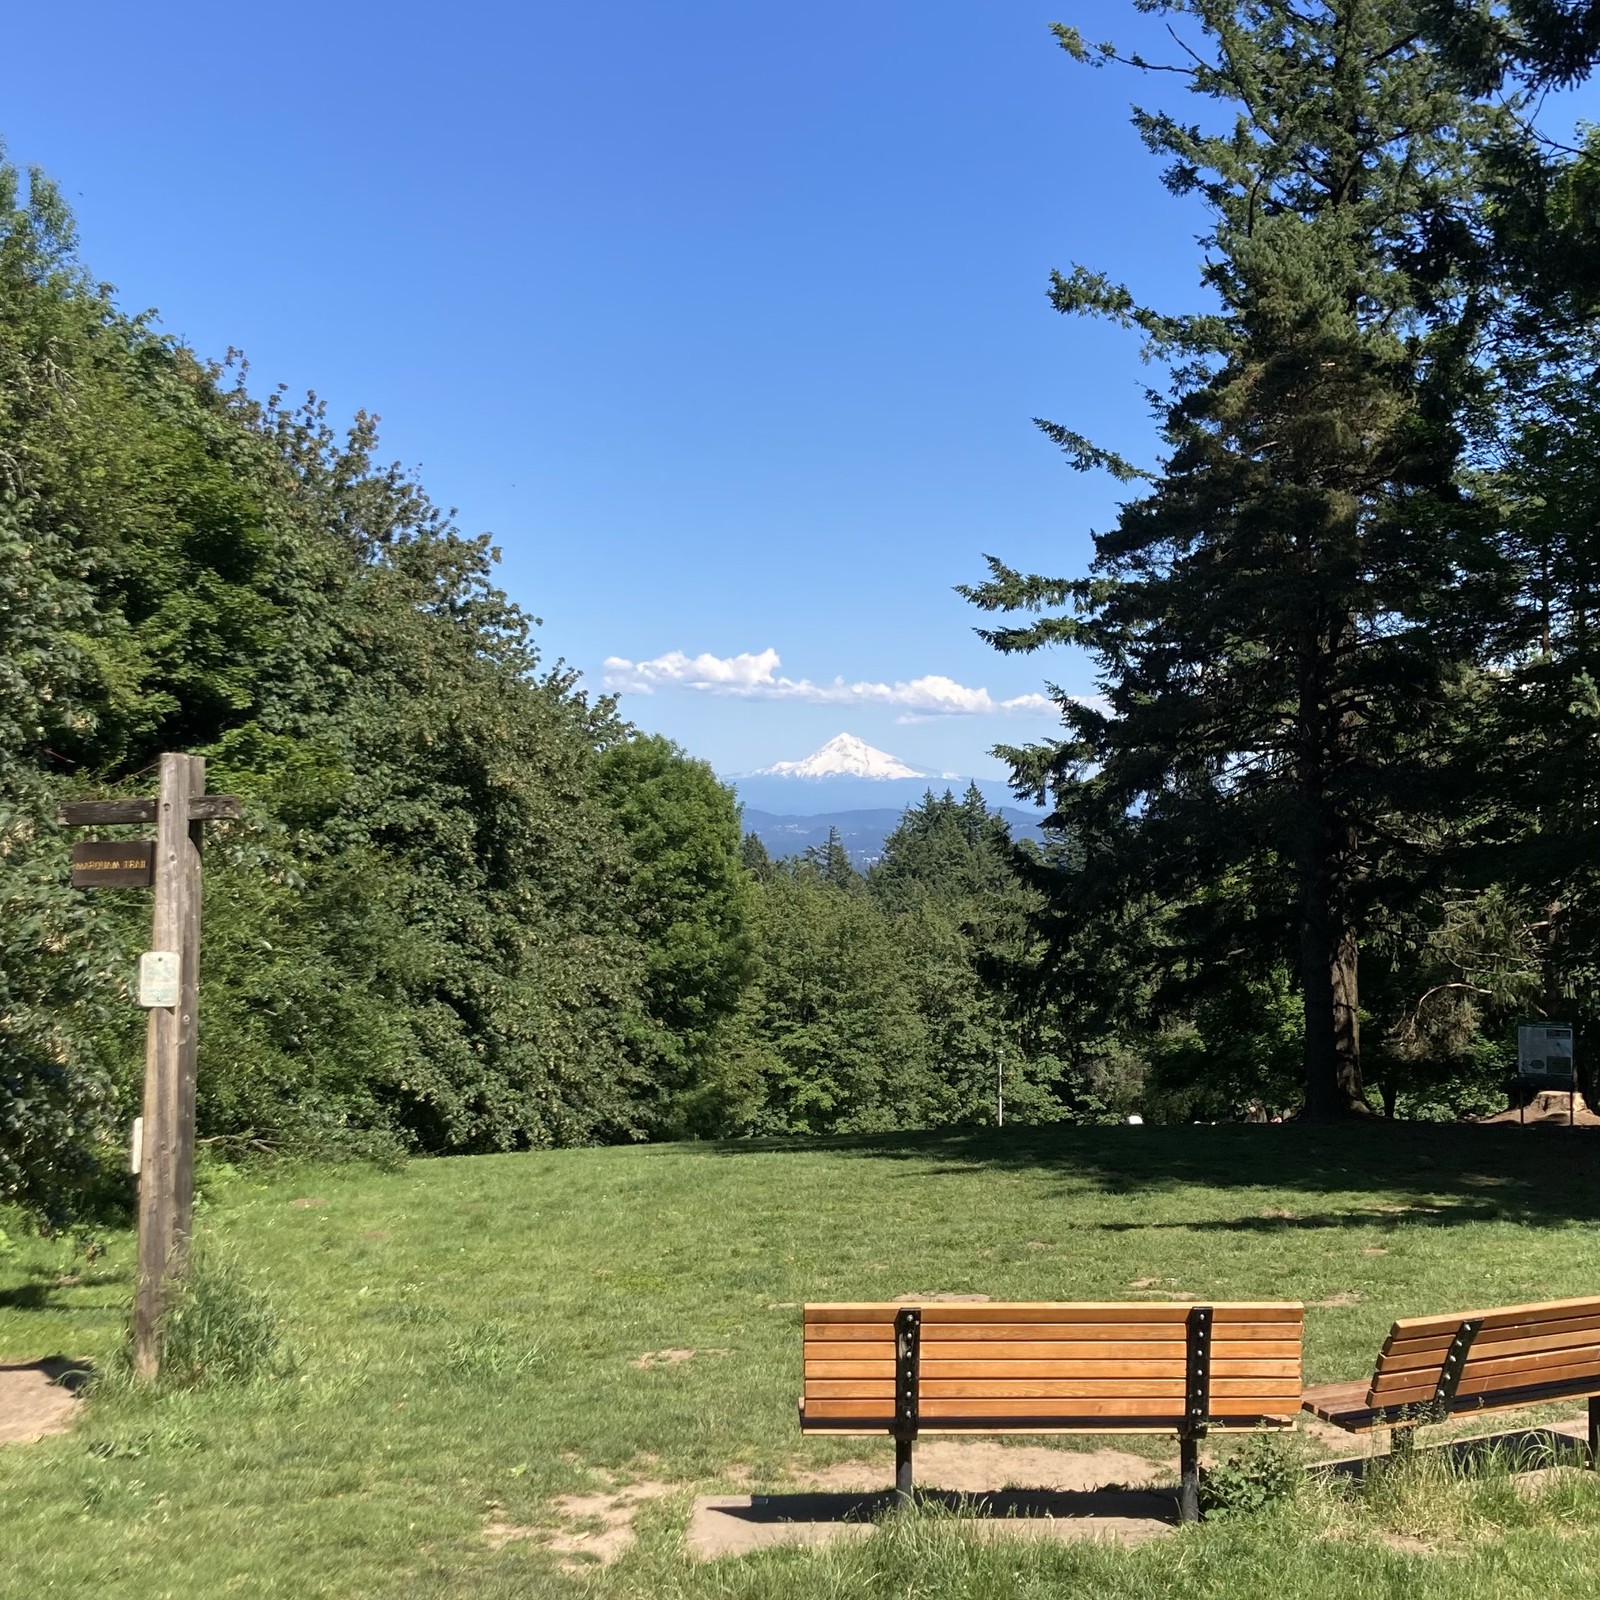 Two empty park, benches faced Mount hood, which is still snowy, despite being almost the first day of summer